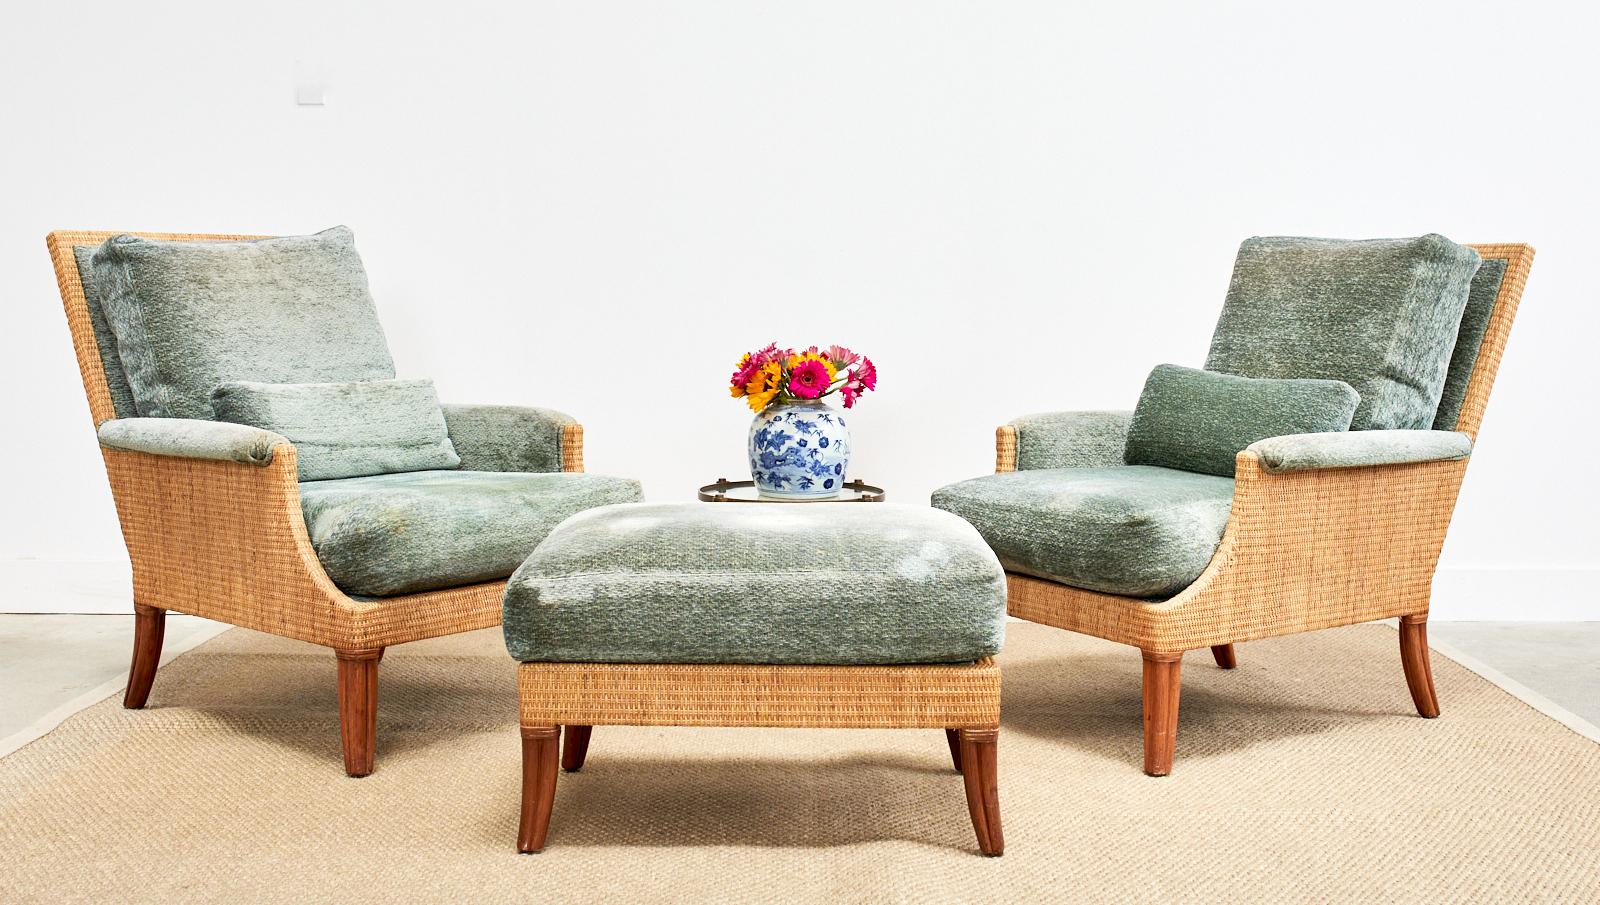 Rare pair of organic modern rattan and wicker oversized lounge chairs designed by Orlando Diaz-Azcuy for McGuire. The set includes two lounge chairs, one ottoman, four thick seat cushions, and two bolster pillows. Known as the Umbria chair it